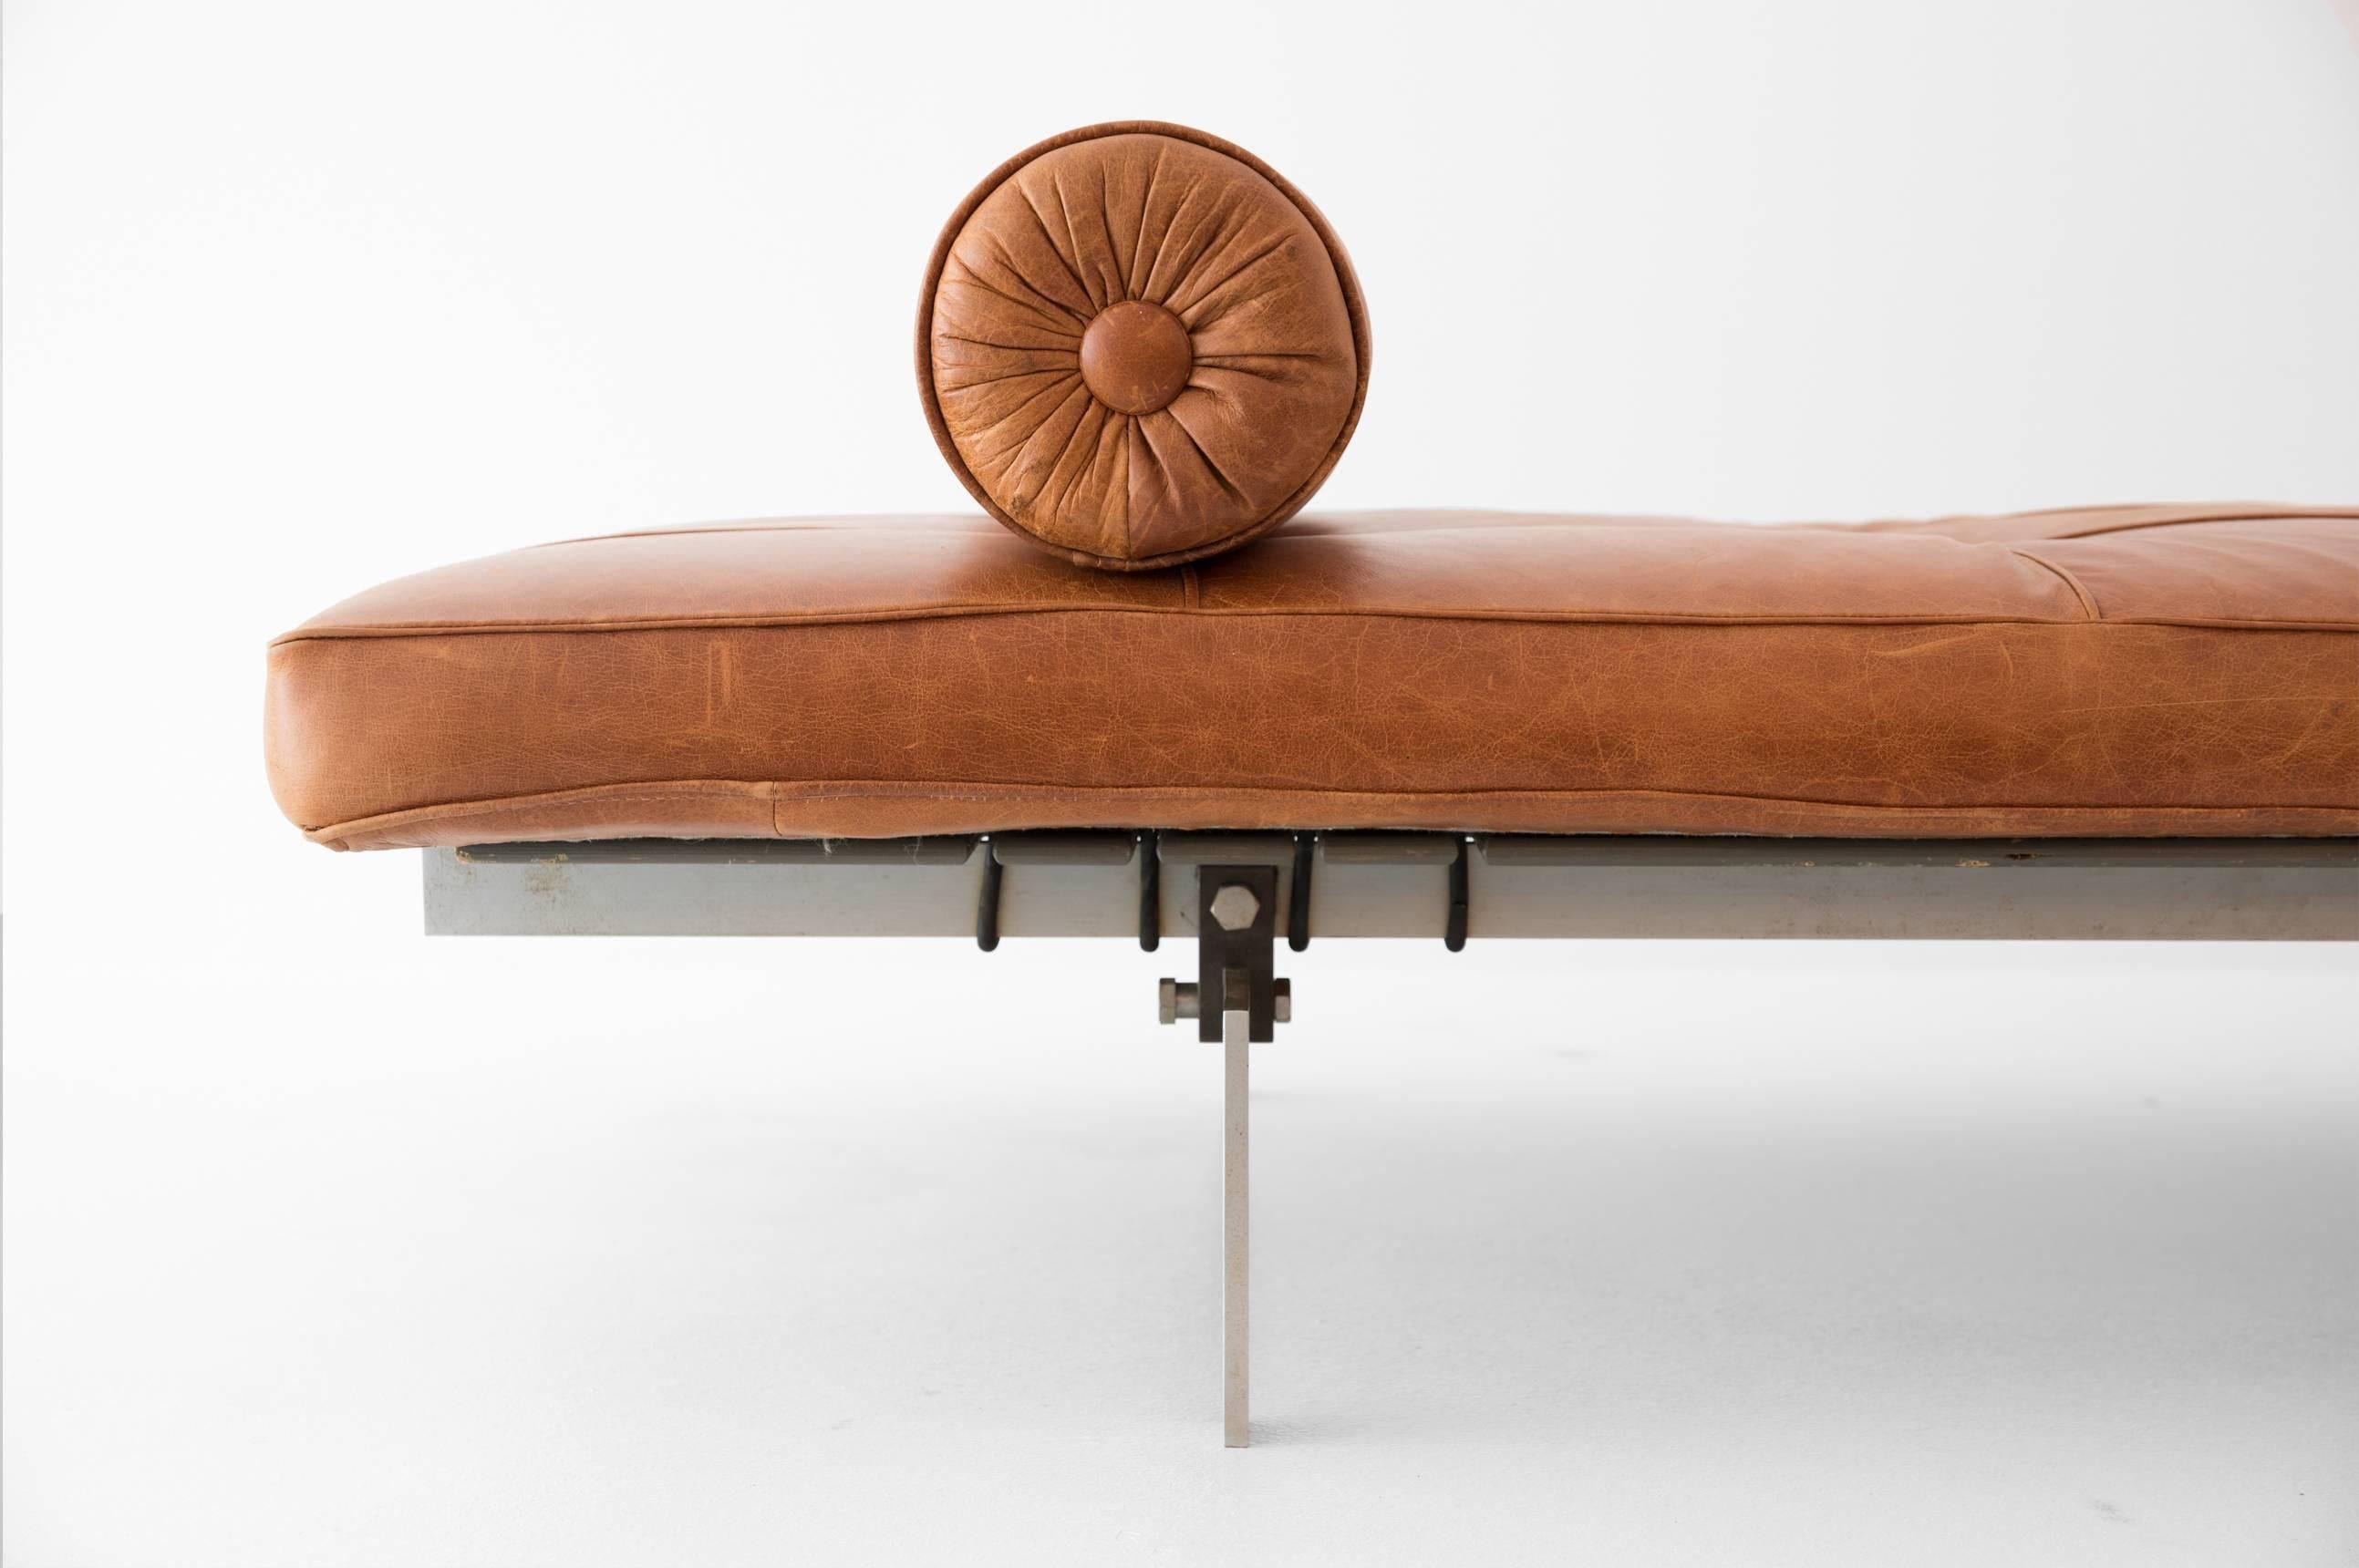 Poul Kjærholm (1929-1980).

Early day bed, model “PK 80.”
Manufactured by E. Kold Christensen.
Denmark, 1957.
Leather, chromium-plated steel.

Measurements:
194,3 cm x 81,3 cm x 30,5h cm.
76 1/2 in x 32 in x 12h in.

Literature:
Frederik